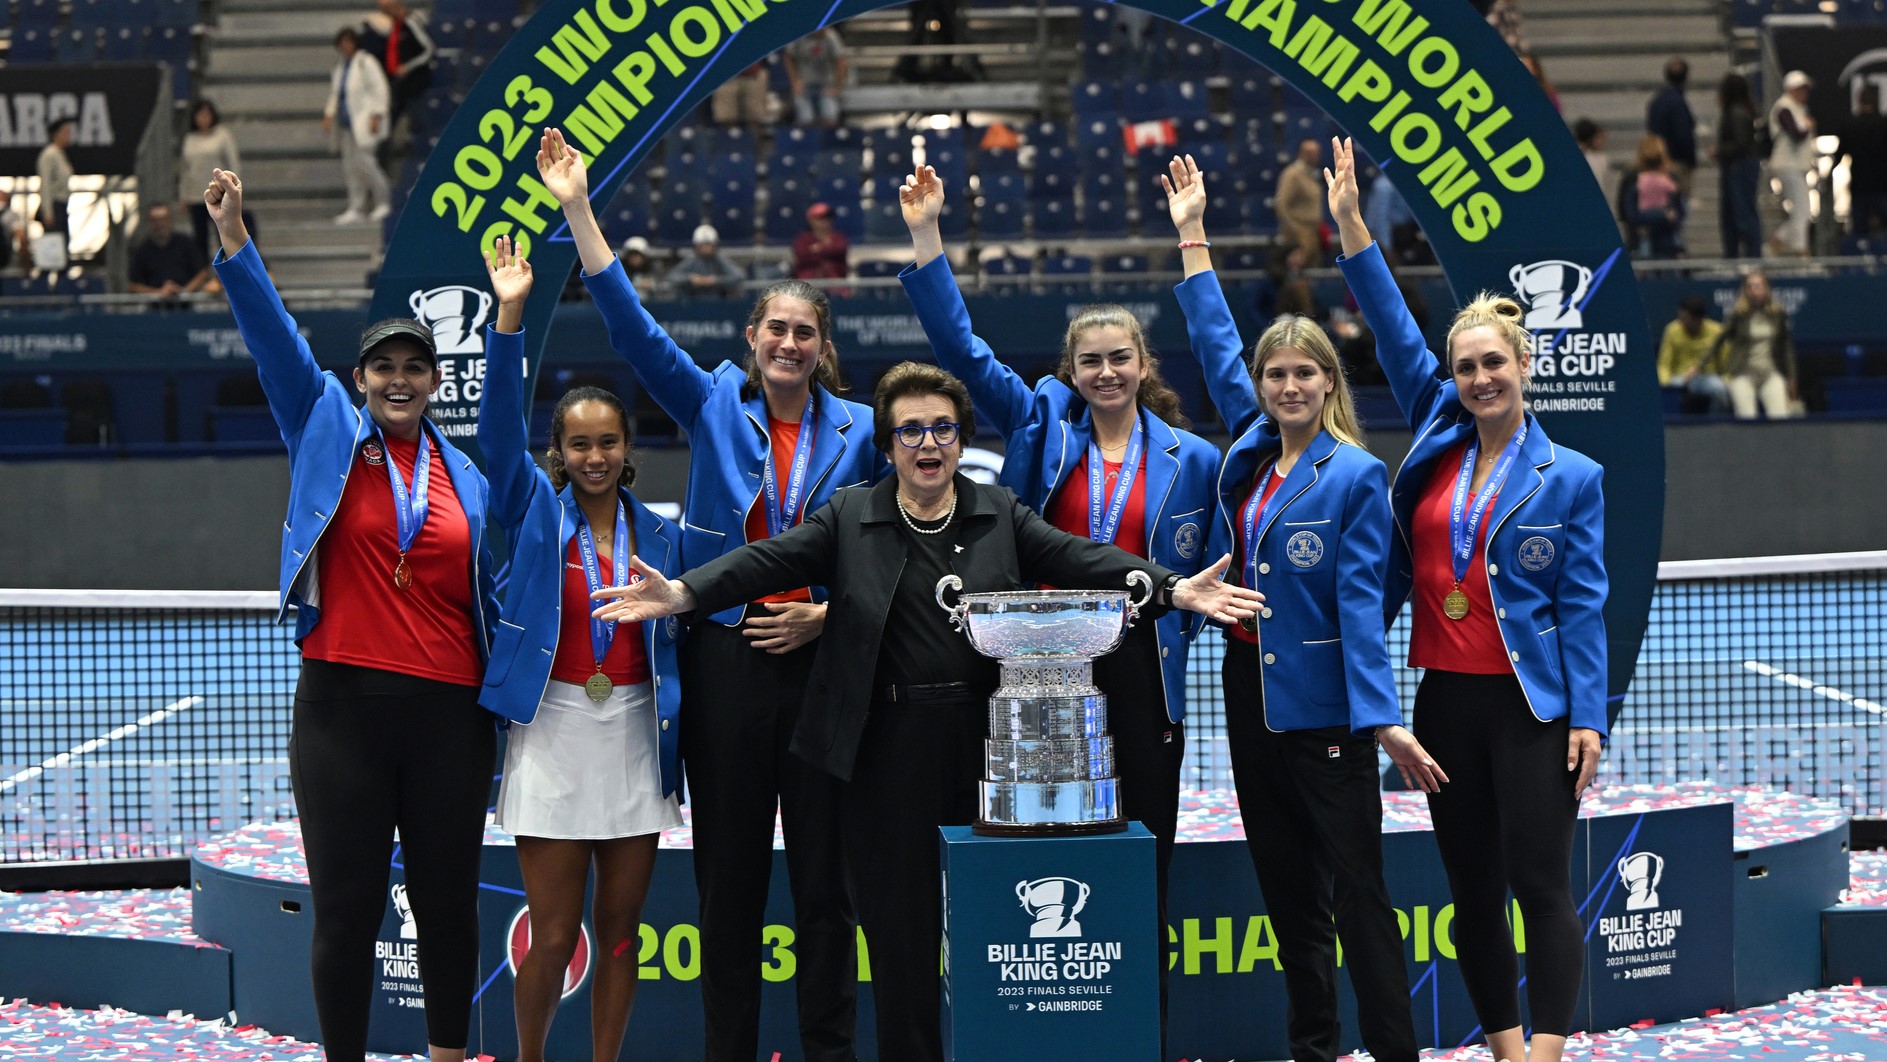 Team Canada celebrates on-court behind the trophy with Billie Jean King.